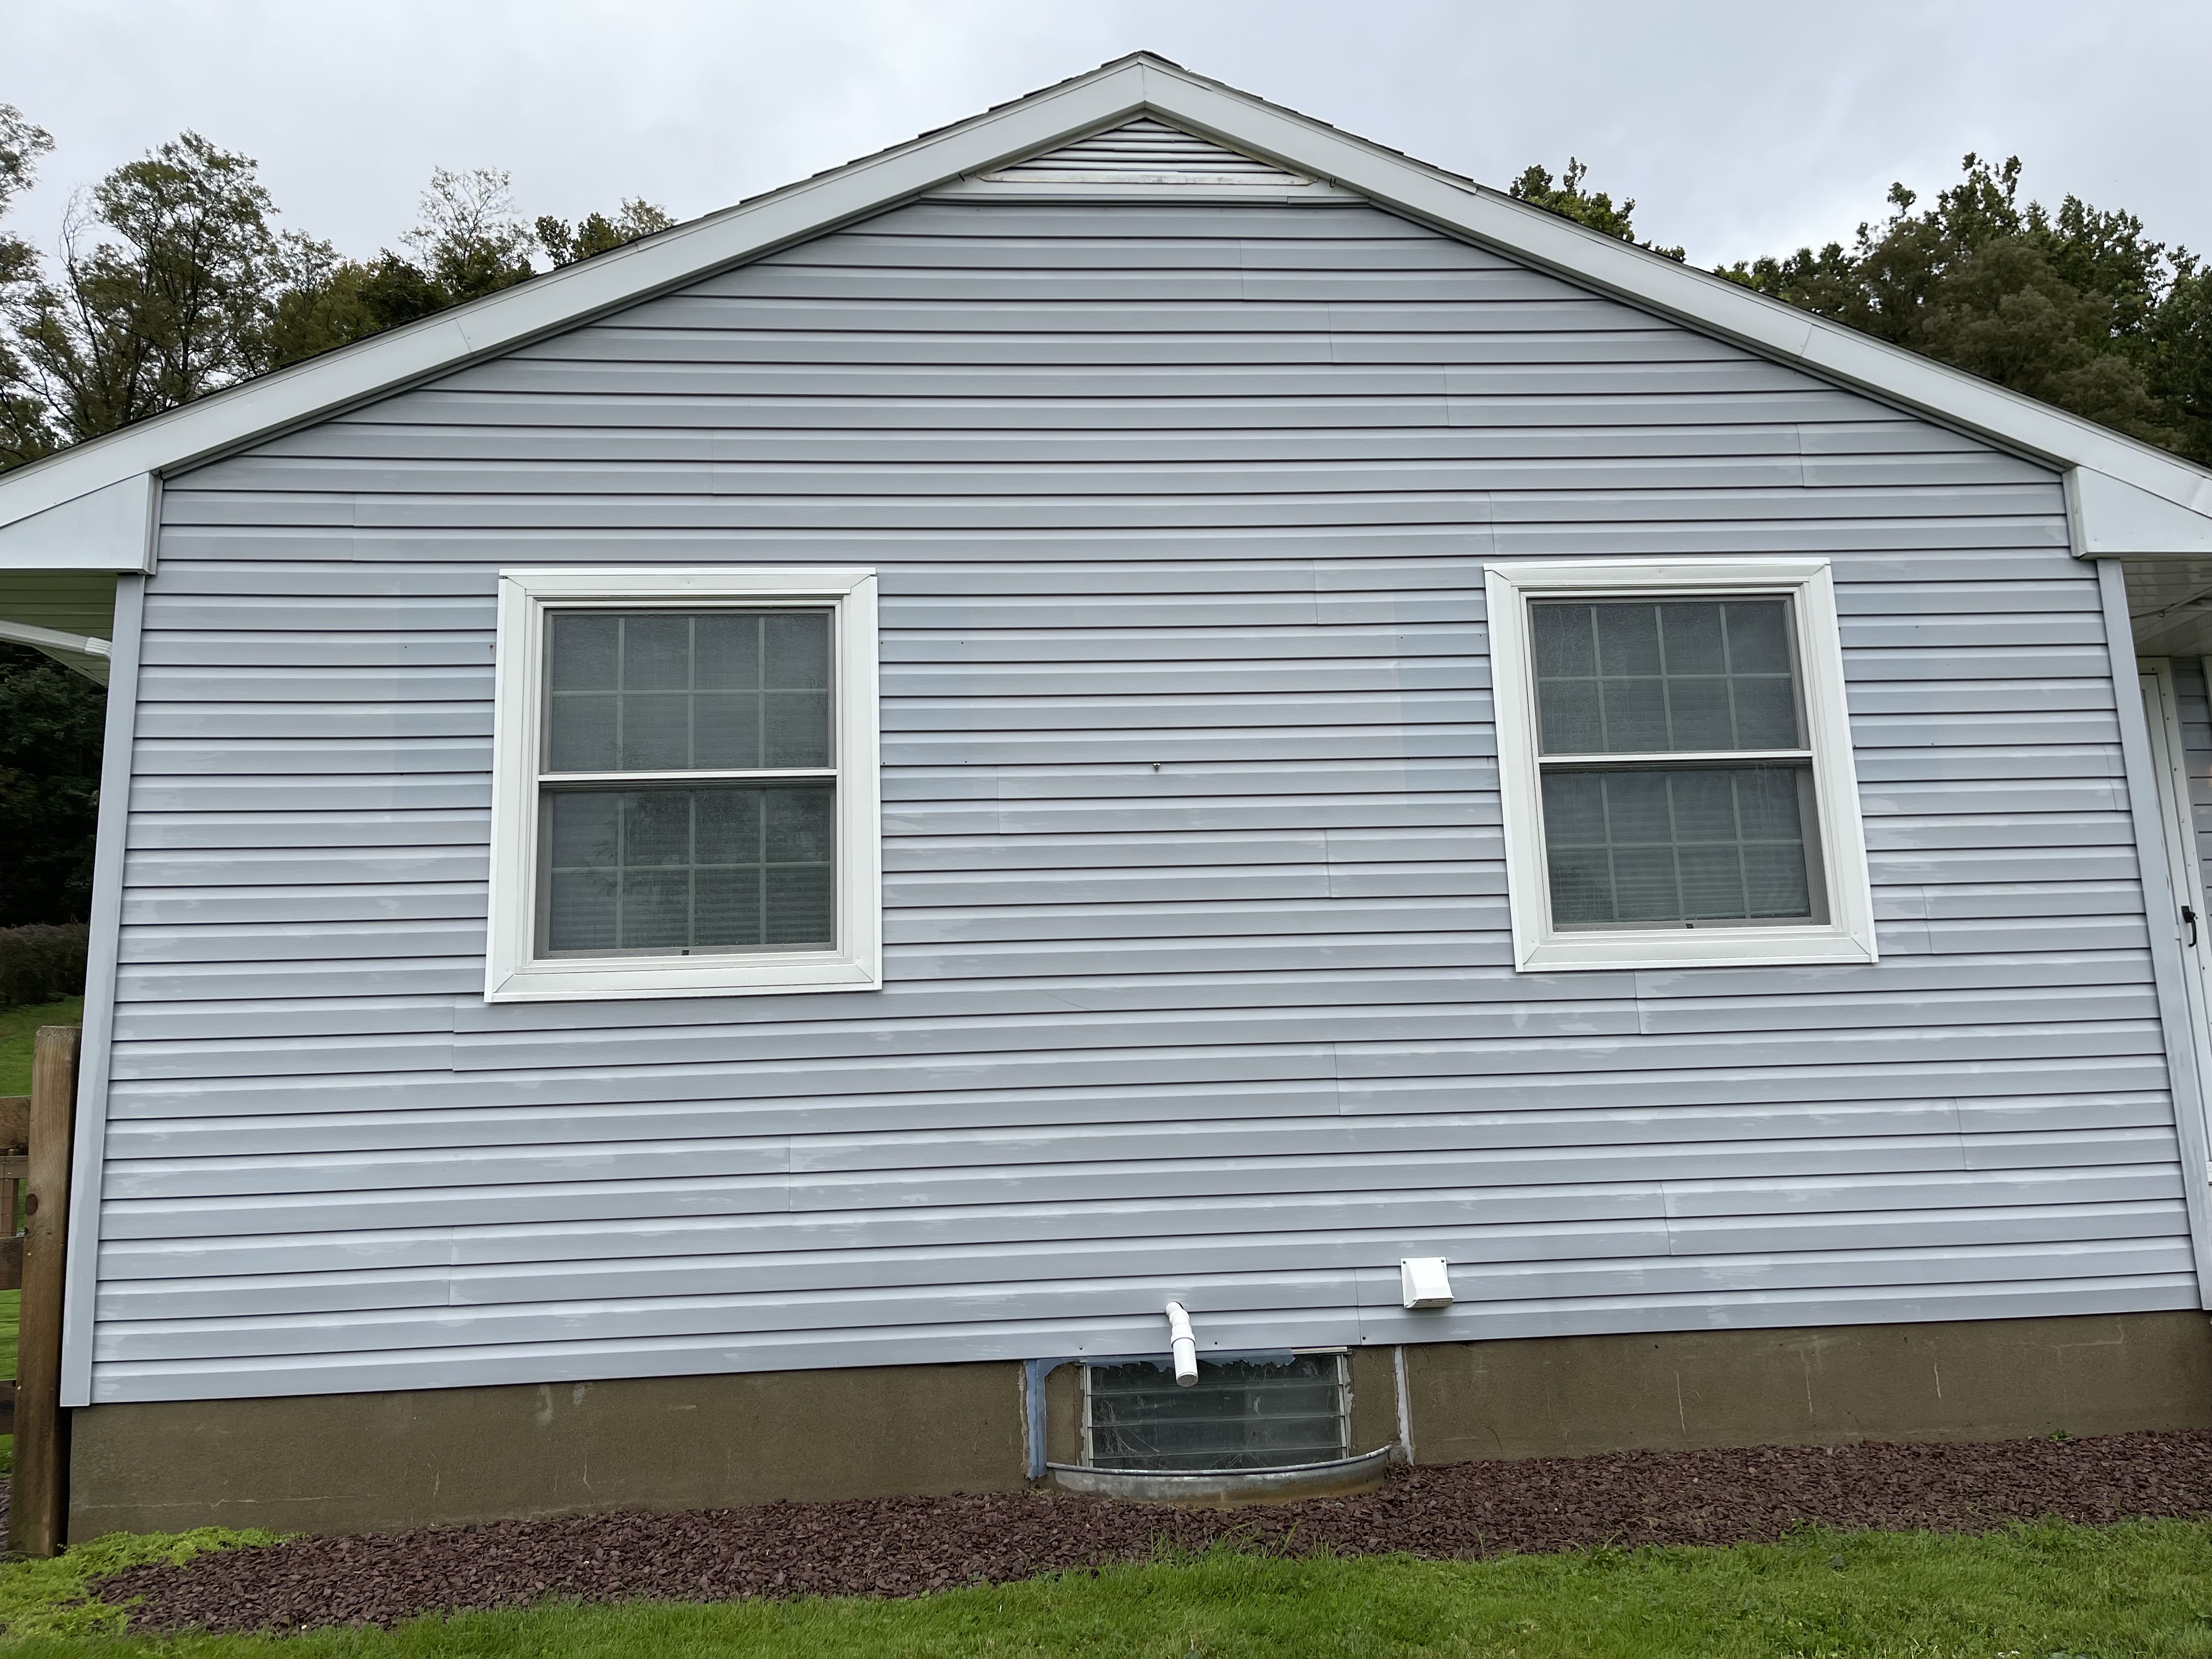 House washing and Gutter Cleaning in Milford,NJ Thumbnail